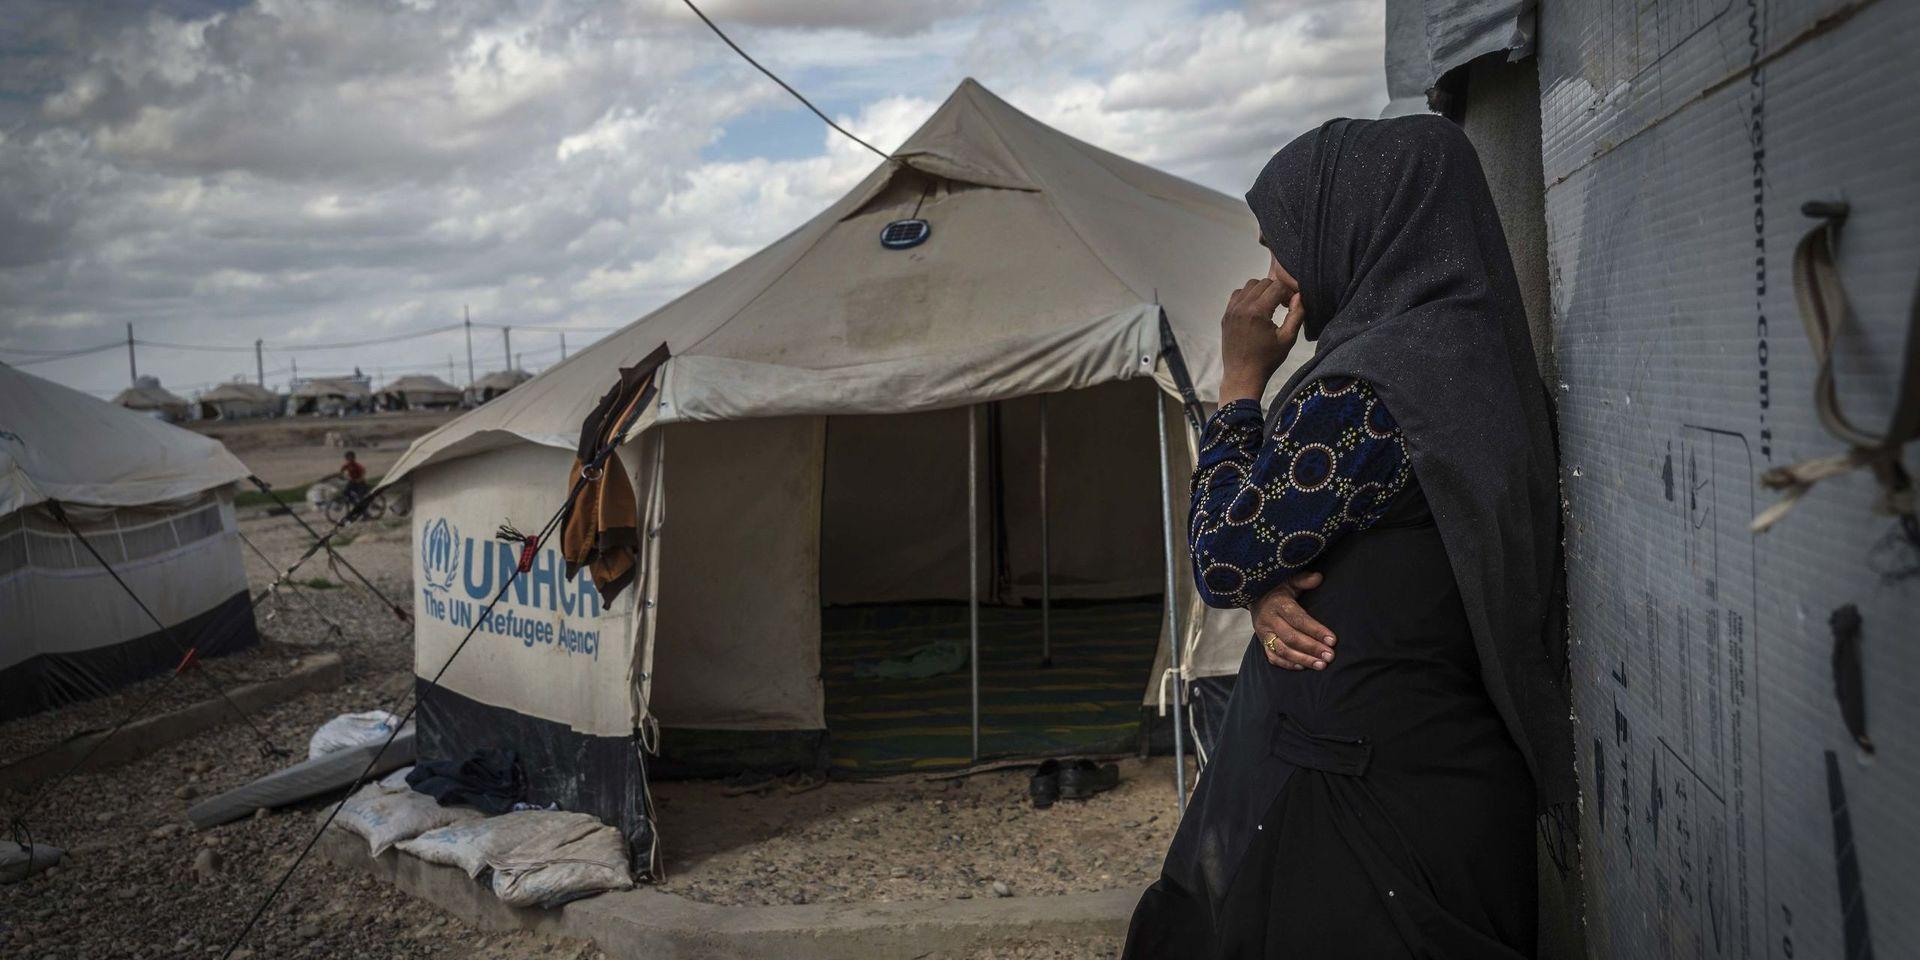 This photo released by Amnesty International on Tuesday, April 18, 2018 shows 33-year-old mother of six, Zahra, outside a tent used for cooking inside in Salamiya camp for internally displaced people where she and her family have lived for 7 months. Originally from Shwra, south of Mosul, she and her family moved to Mosul three years ago after her husband joined ISIS, working with the group as a cook. He was killed by an airstrike in June 2017. Amnesty says its report details the predicament of thousands of female-led families left to fend for themselves in displaced camps after male family members were killed, arbitrarily arrested or forcibly disappeared. (Claire Thomas/Amnesty International via AP)